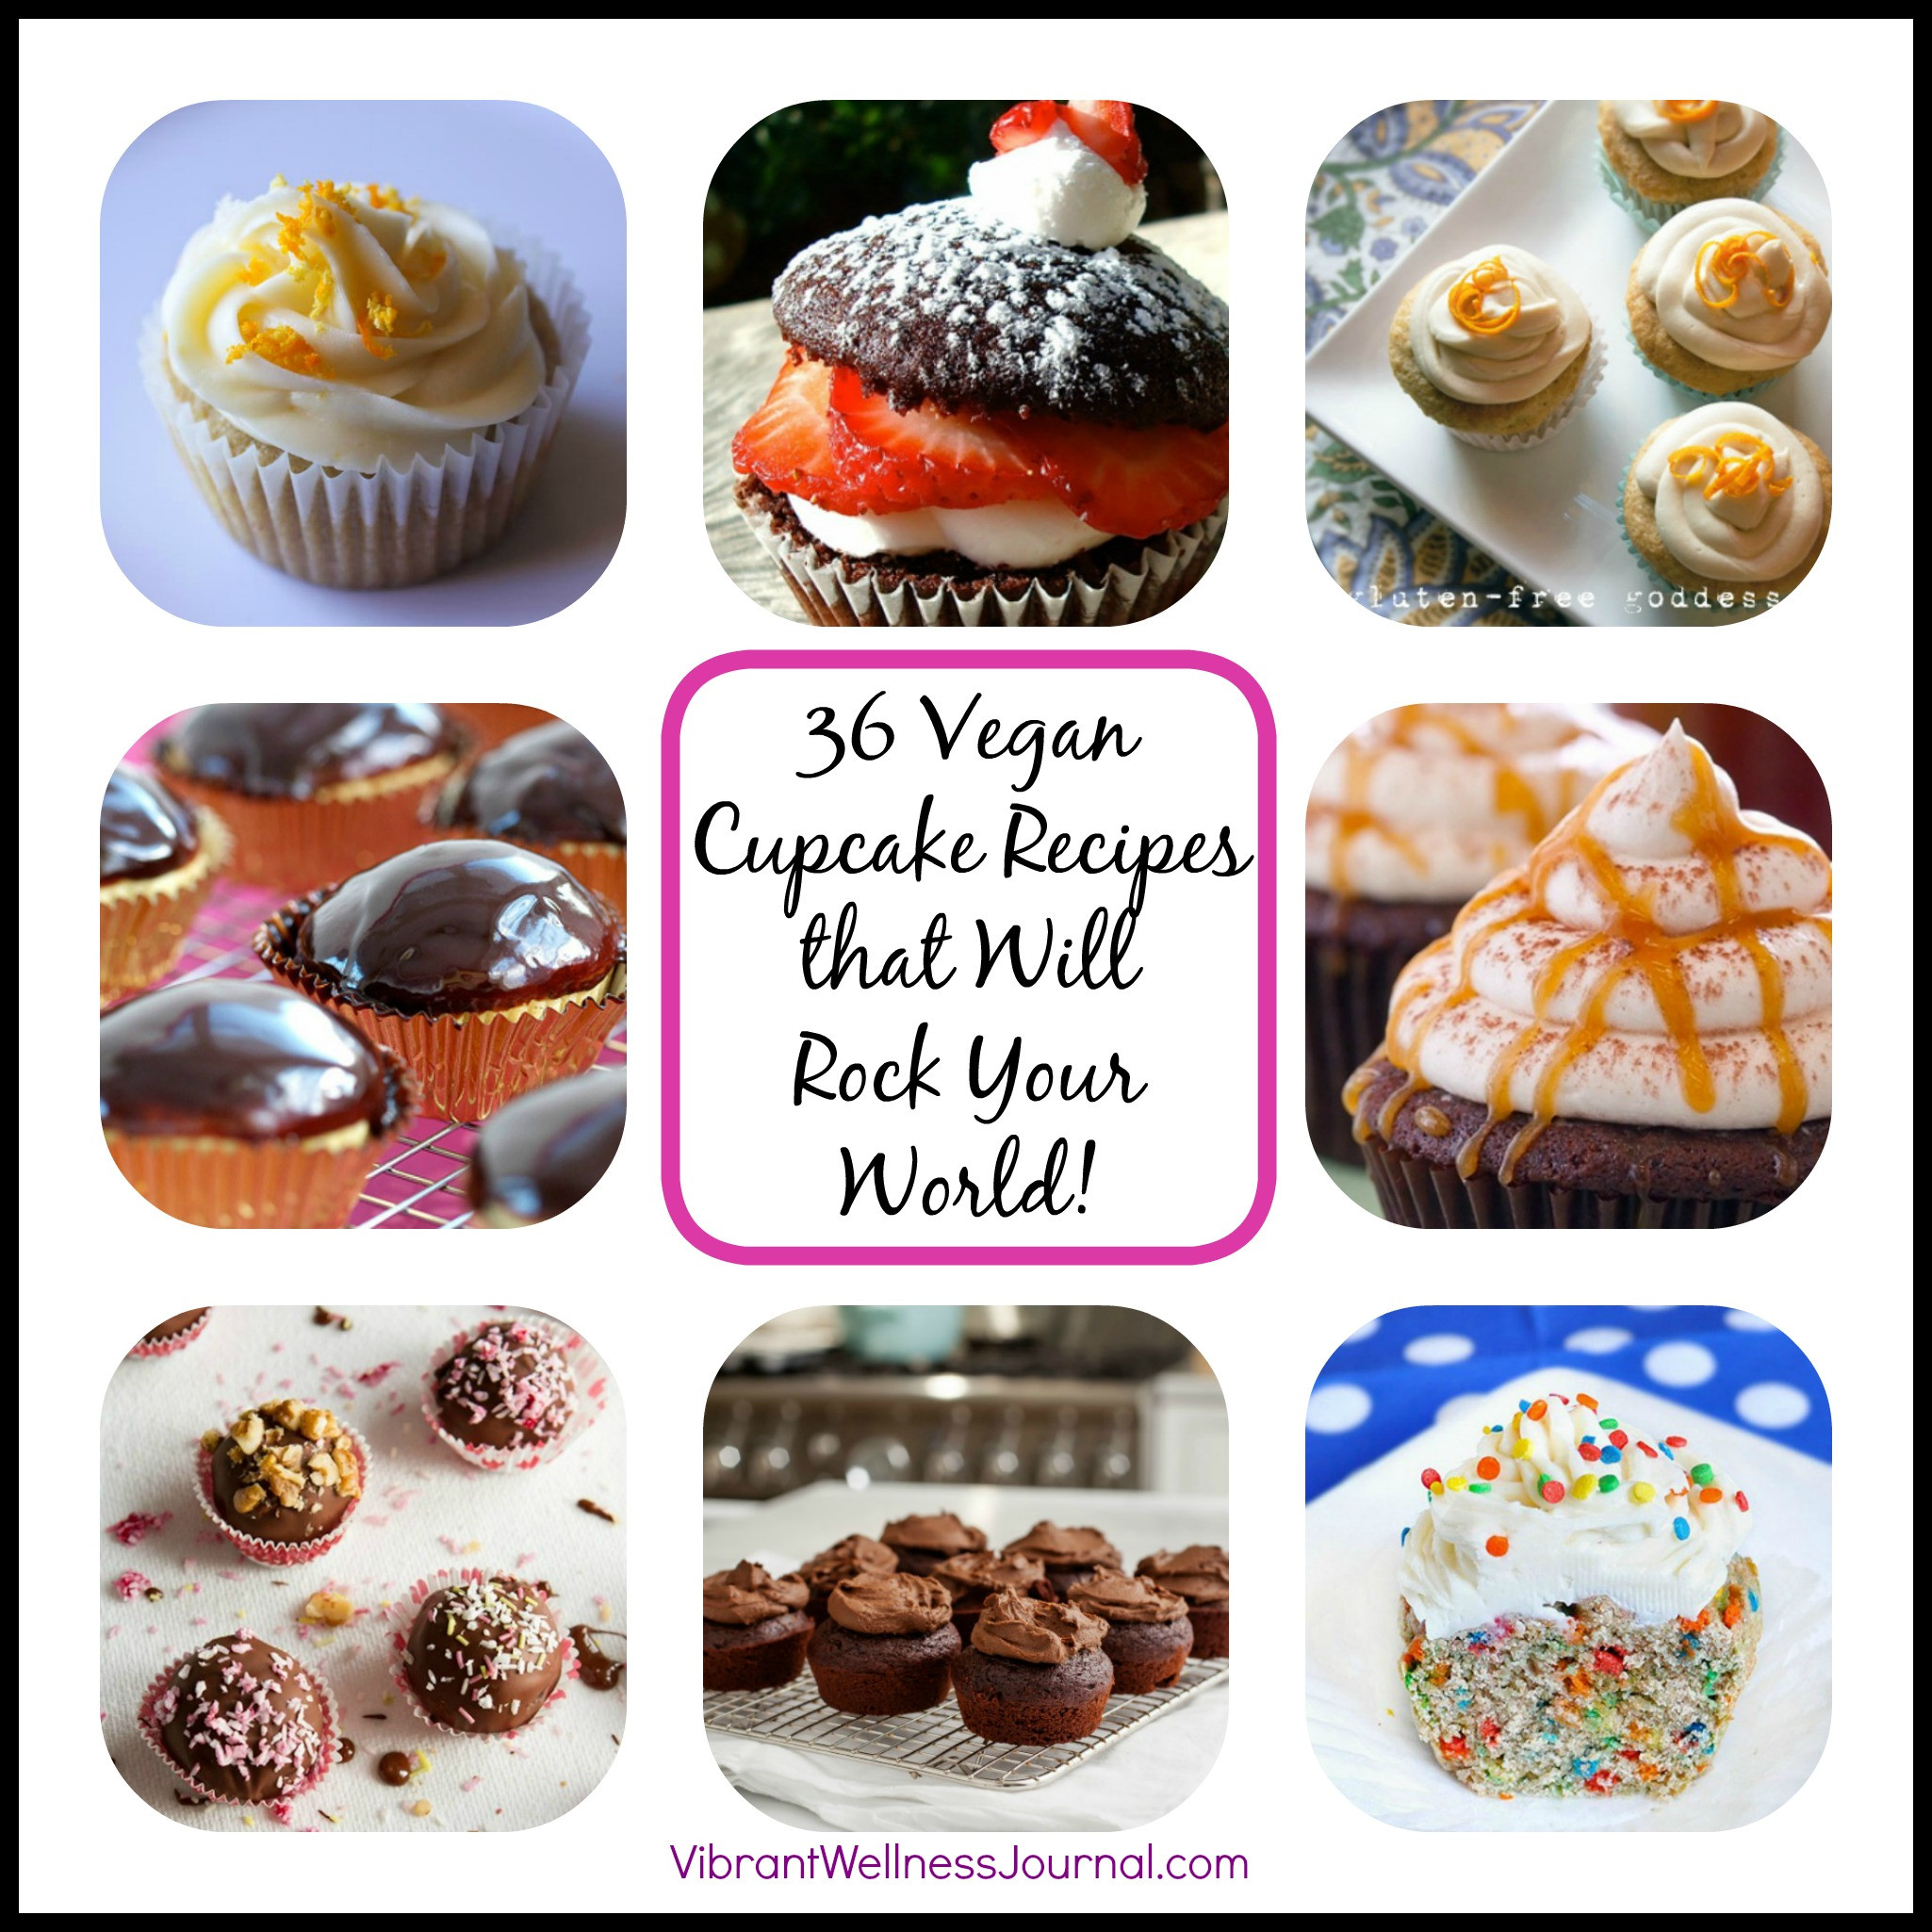 Vegan Cupcake Recipes
 36 Vegan Cupcake Recipes that Will Rock Your World